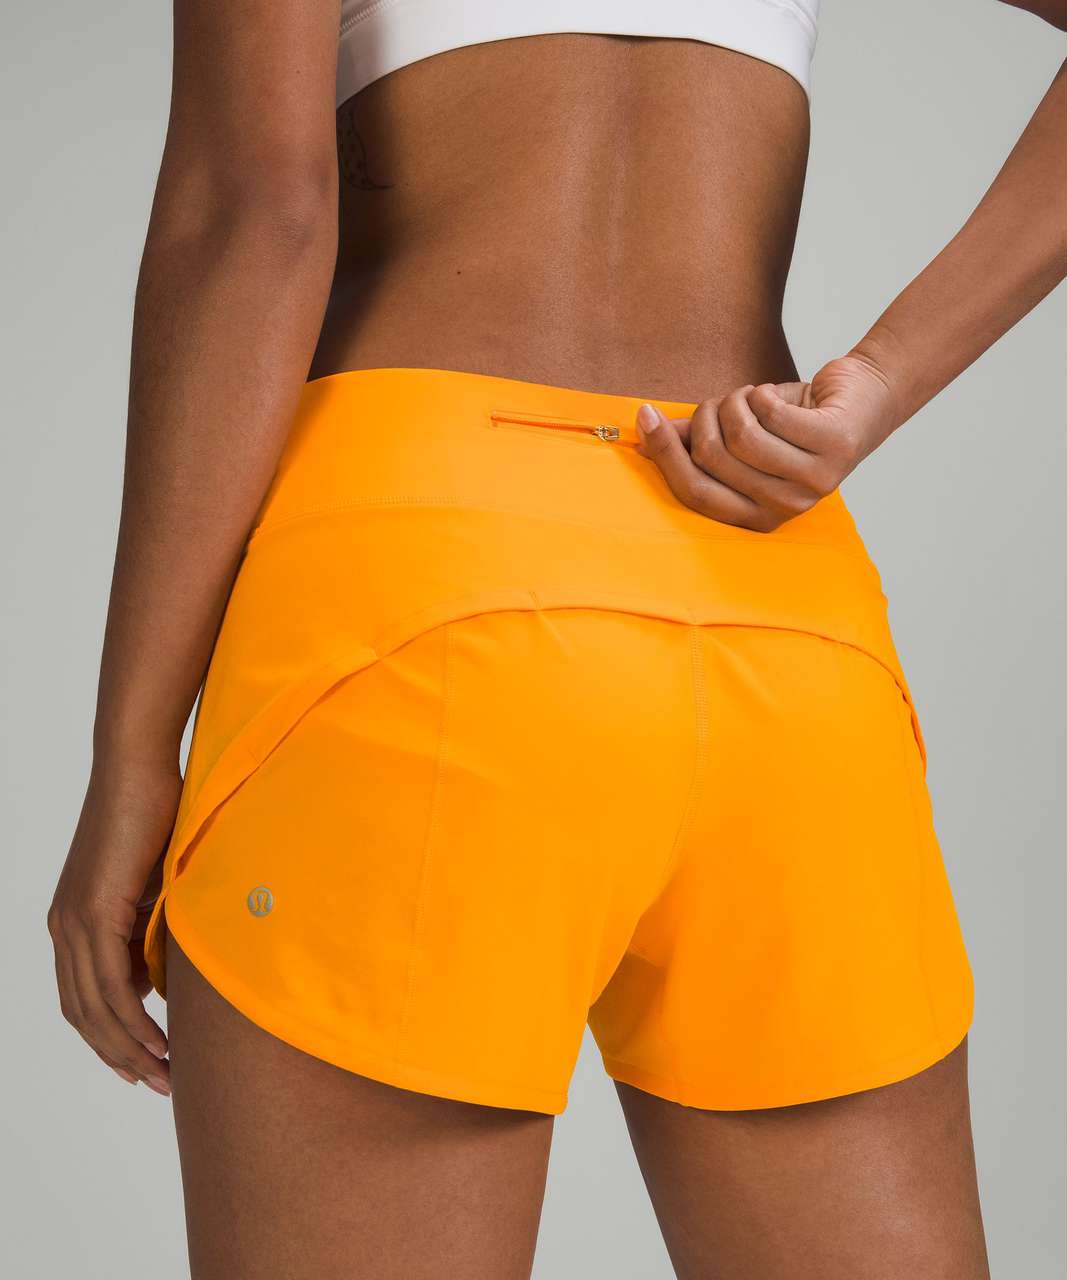 Lululemon Speed Up Mid-Rise Lined Short 4" - Clementine